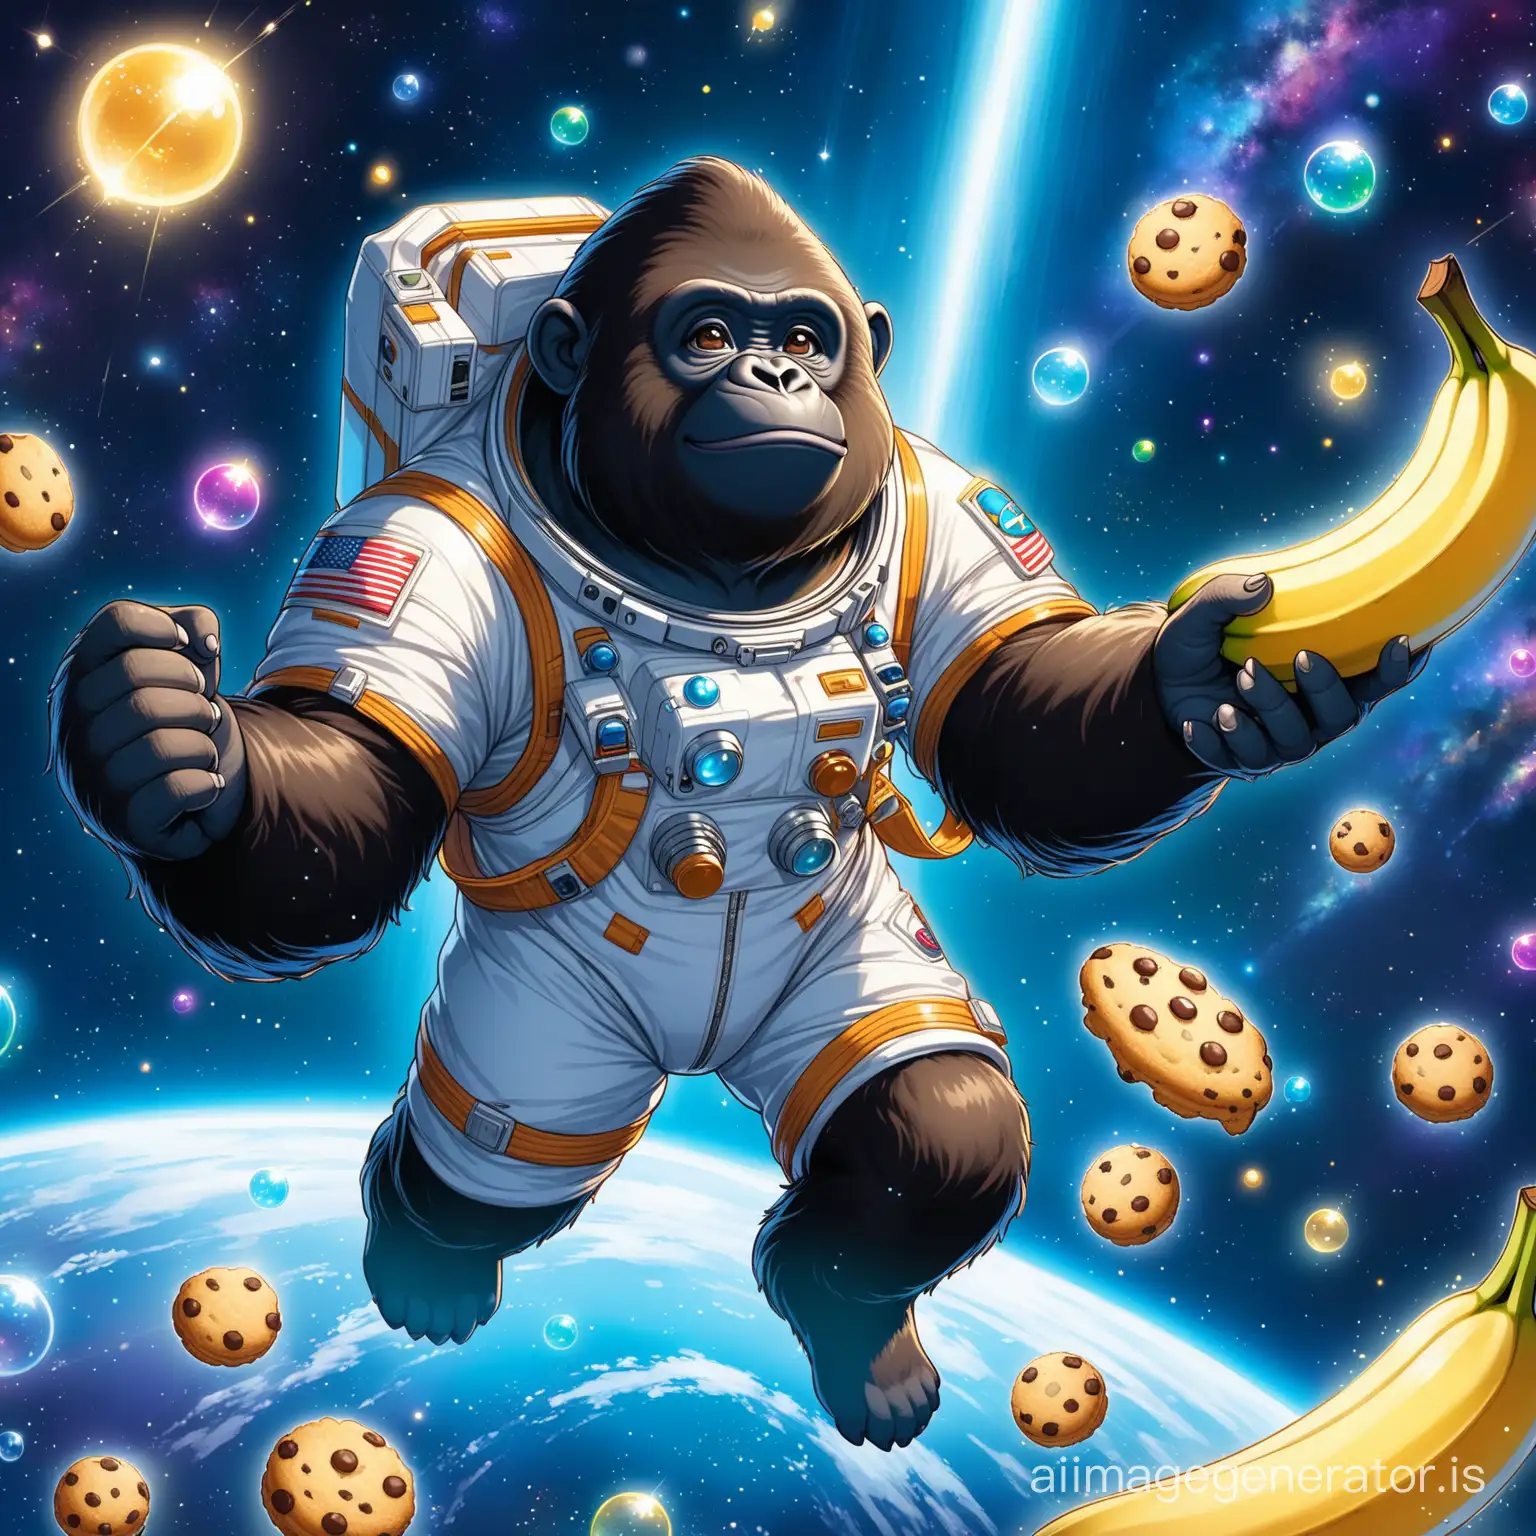 A happy gorila have a banana in hands in space
Gorila have Spacesuit
Bubbles and small cookies are scattered in the space
Details and lighting can be seen with great precision and it is impressive